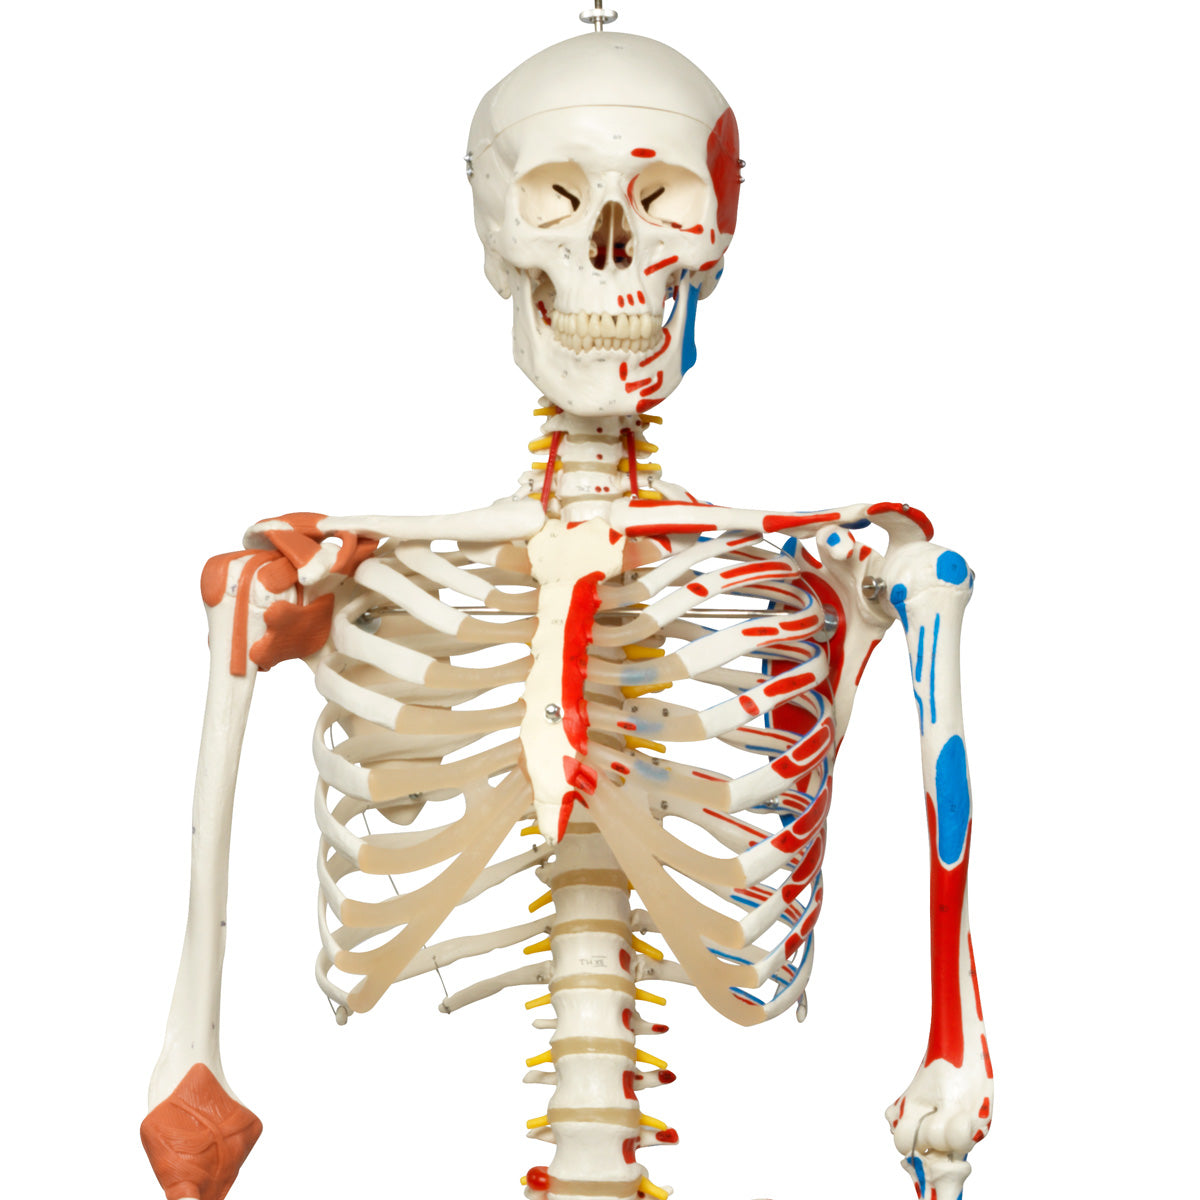 A13/1 Human Skeleton Model Sam on Hanging Stand with Muscle & Ligaments - 3B Smart Anatomy